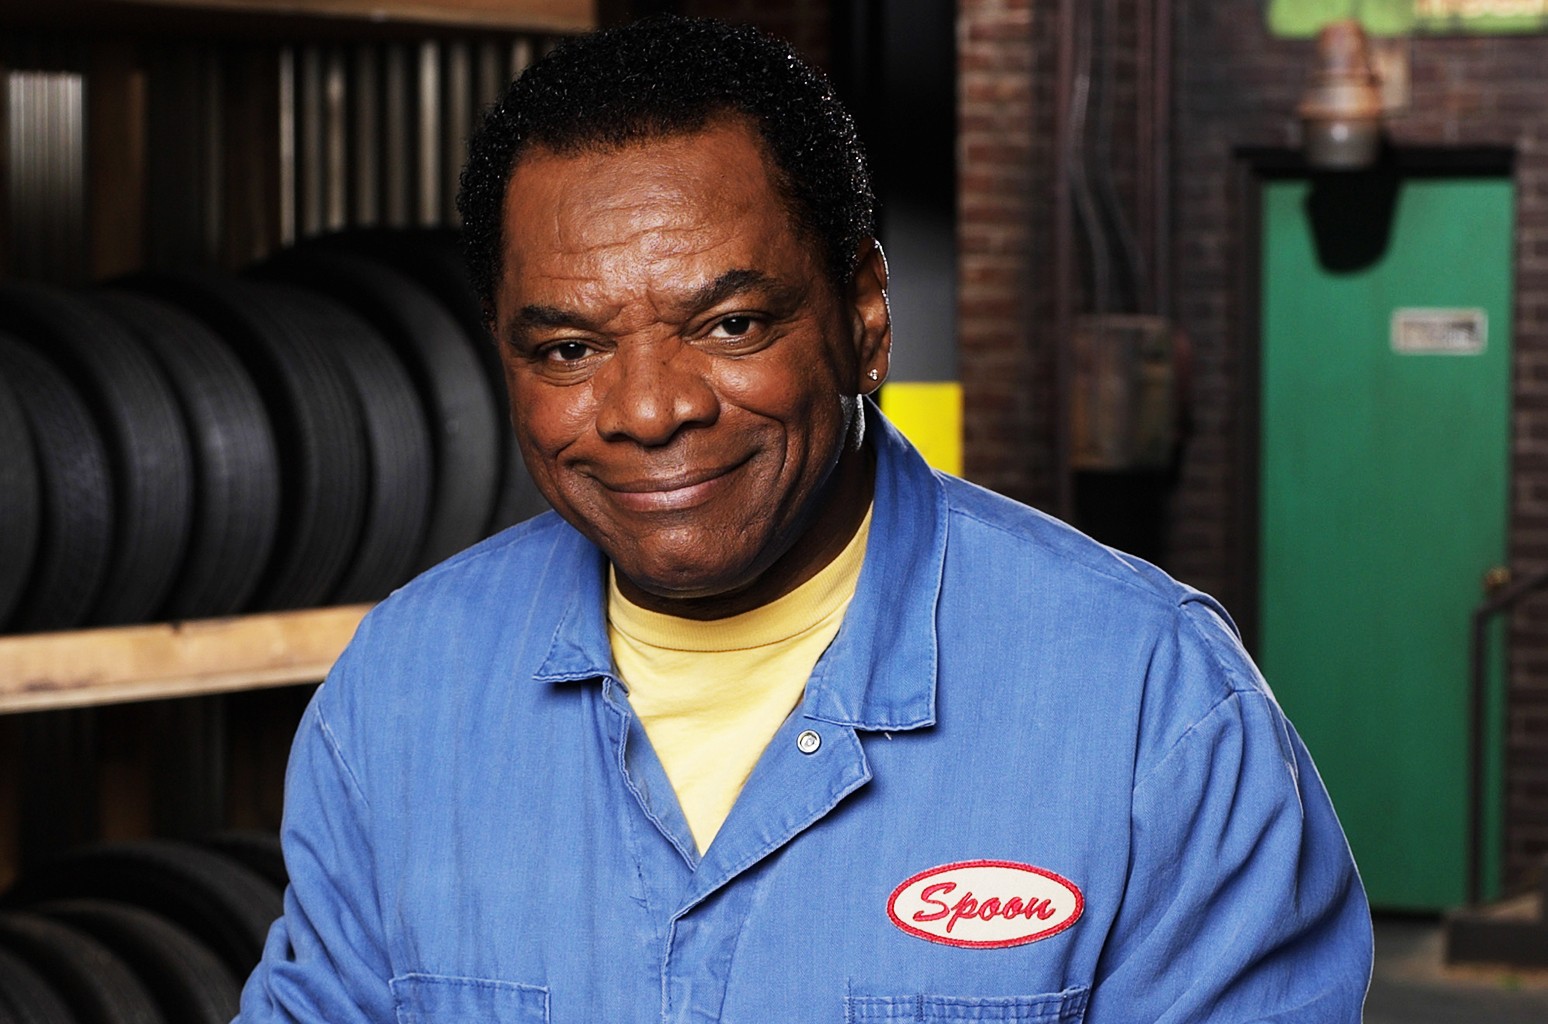 John Witherspoon (Actor) Bio, Family, Career, Net Worth, Measurements